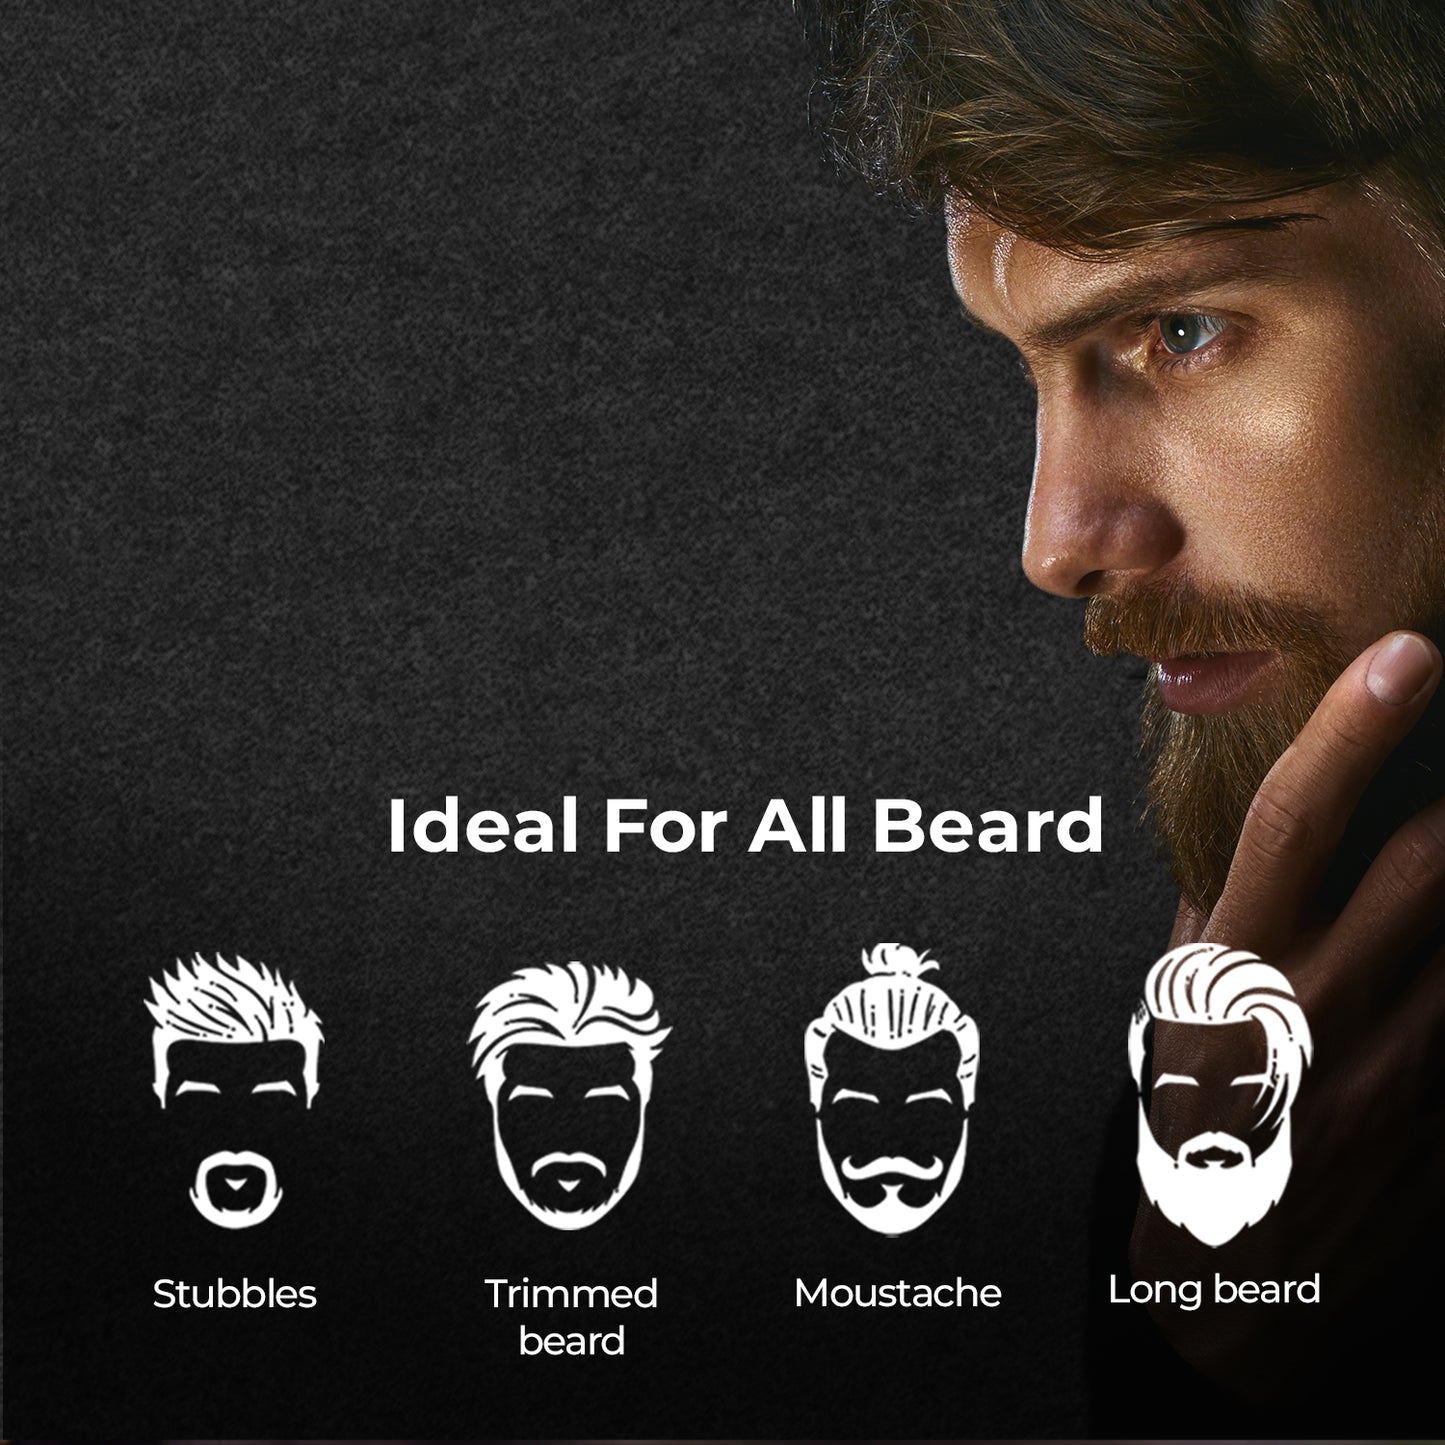 4 in 1 Beard Grooming, Styling and Trimming Kit Beard Care Growth Kit